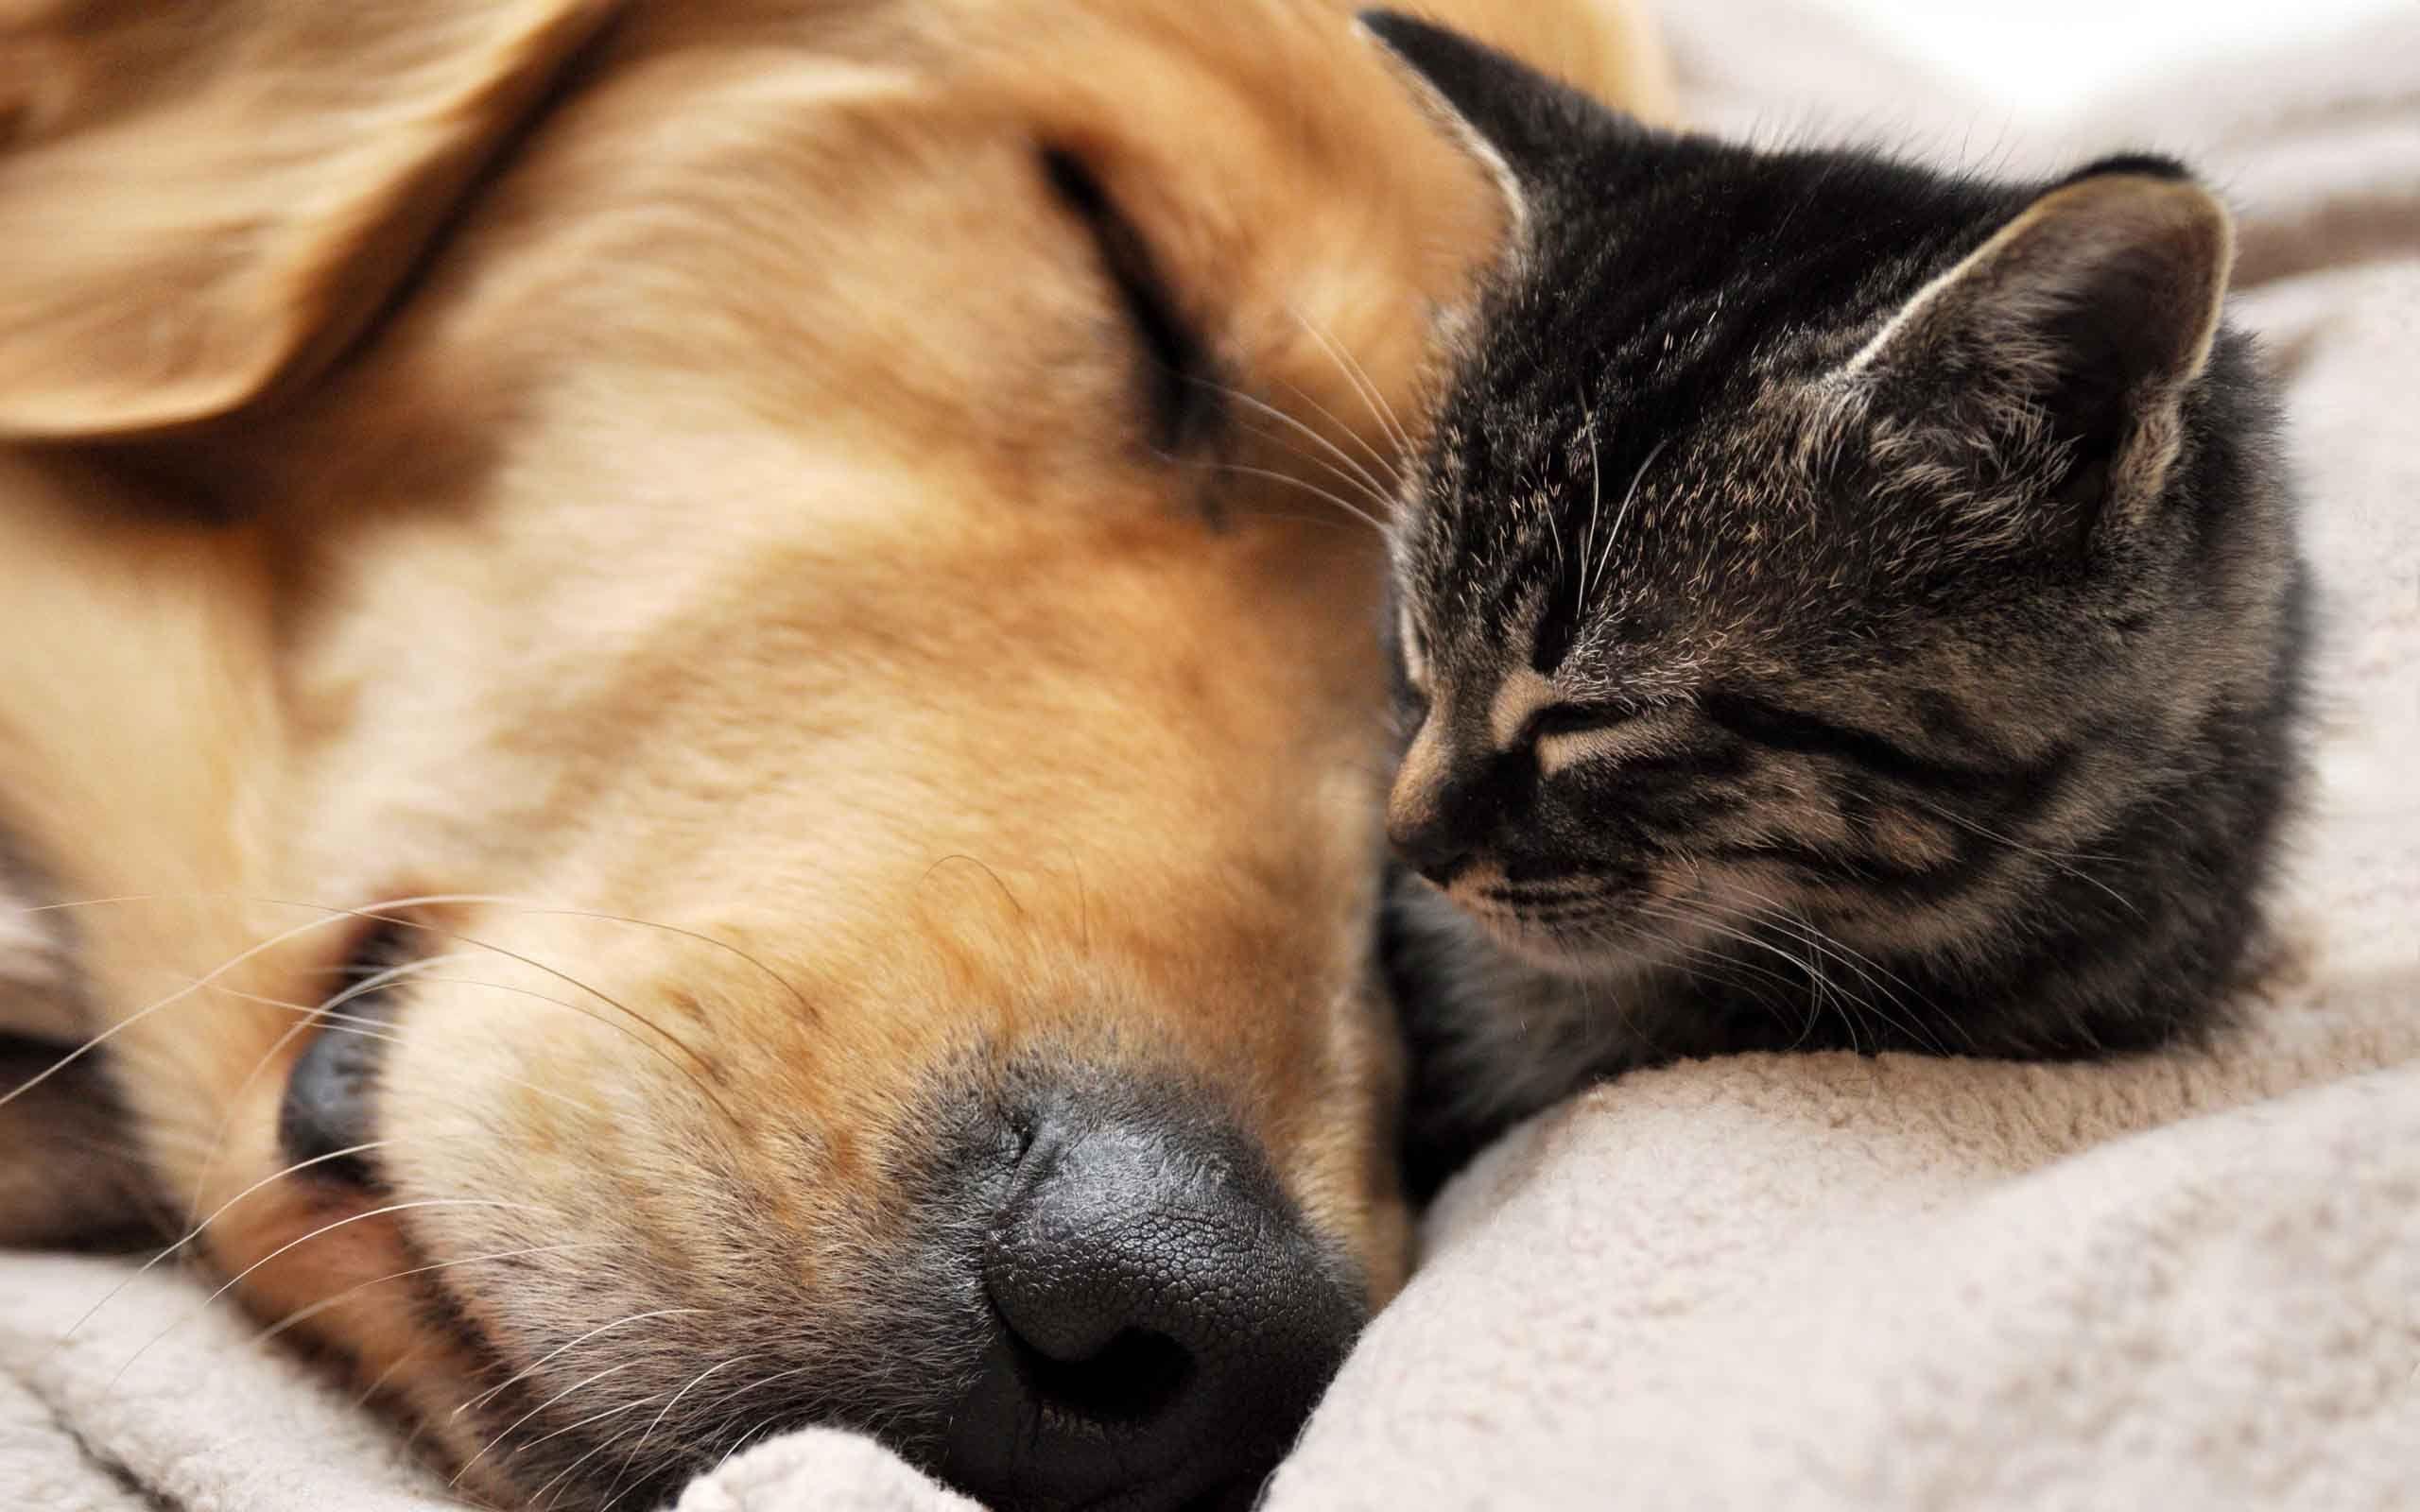 Cat and dog sleeping wallpaper and image, picture